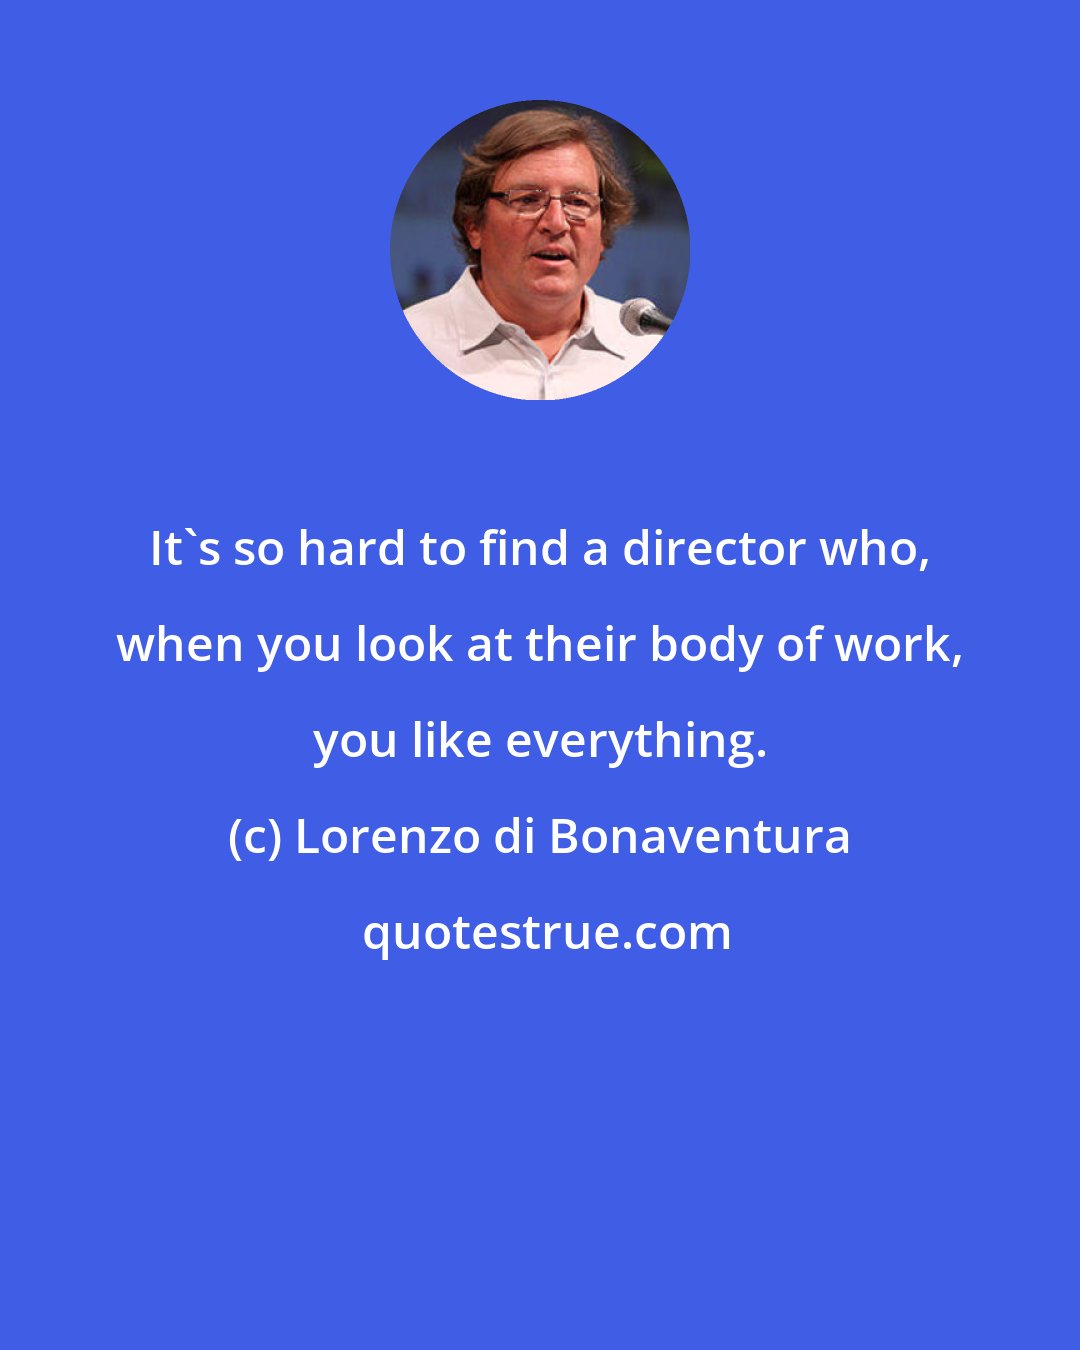 Lorenzo di Bonaventura: It's so hard to find a director who, when you look at their body of work, you like everything.